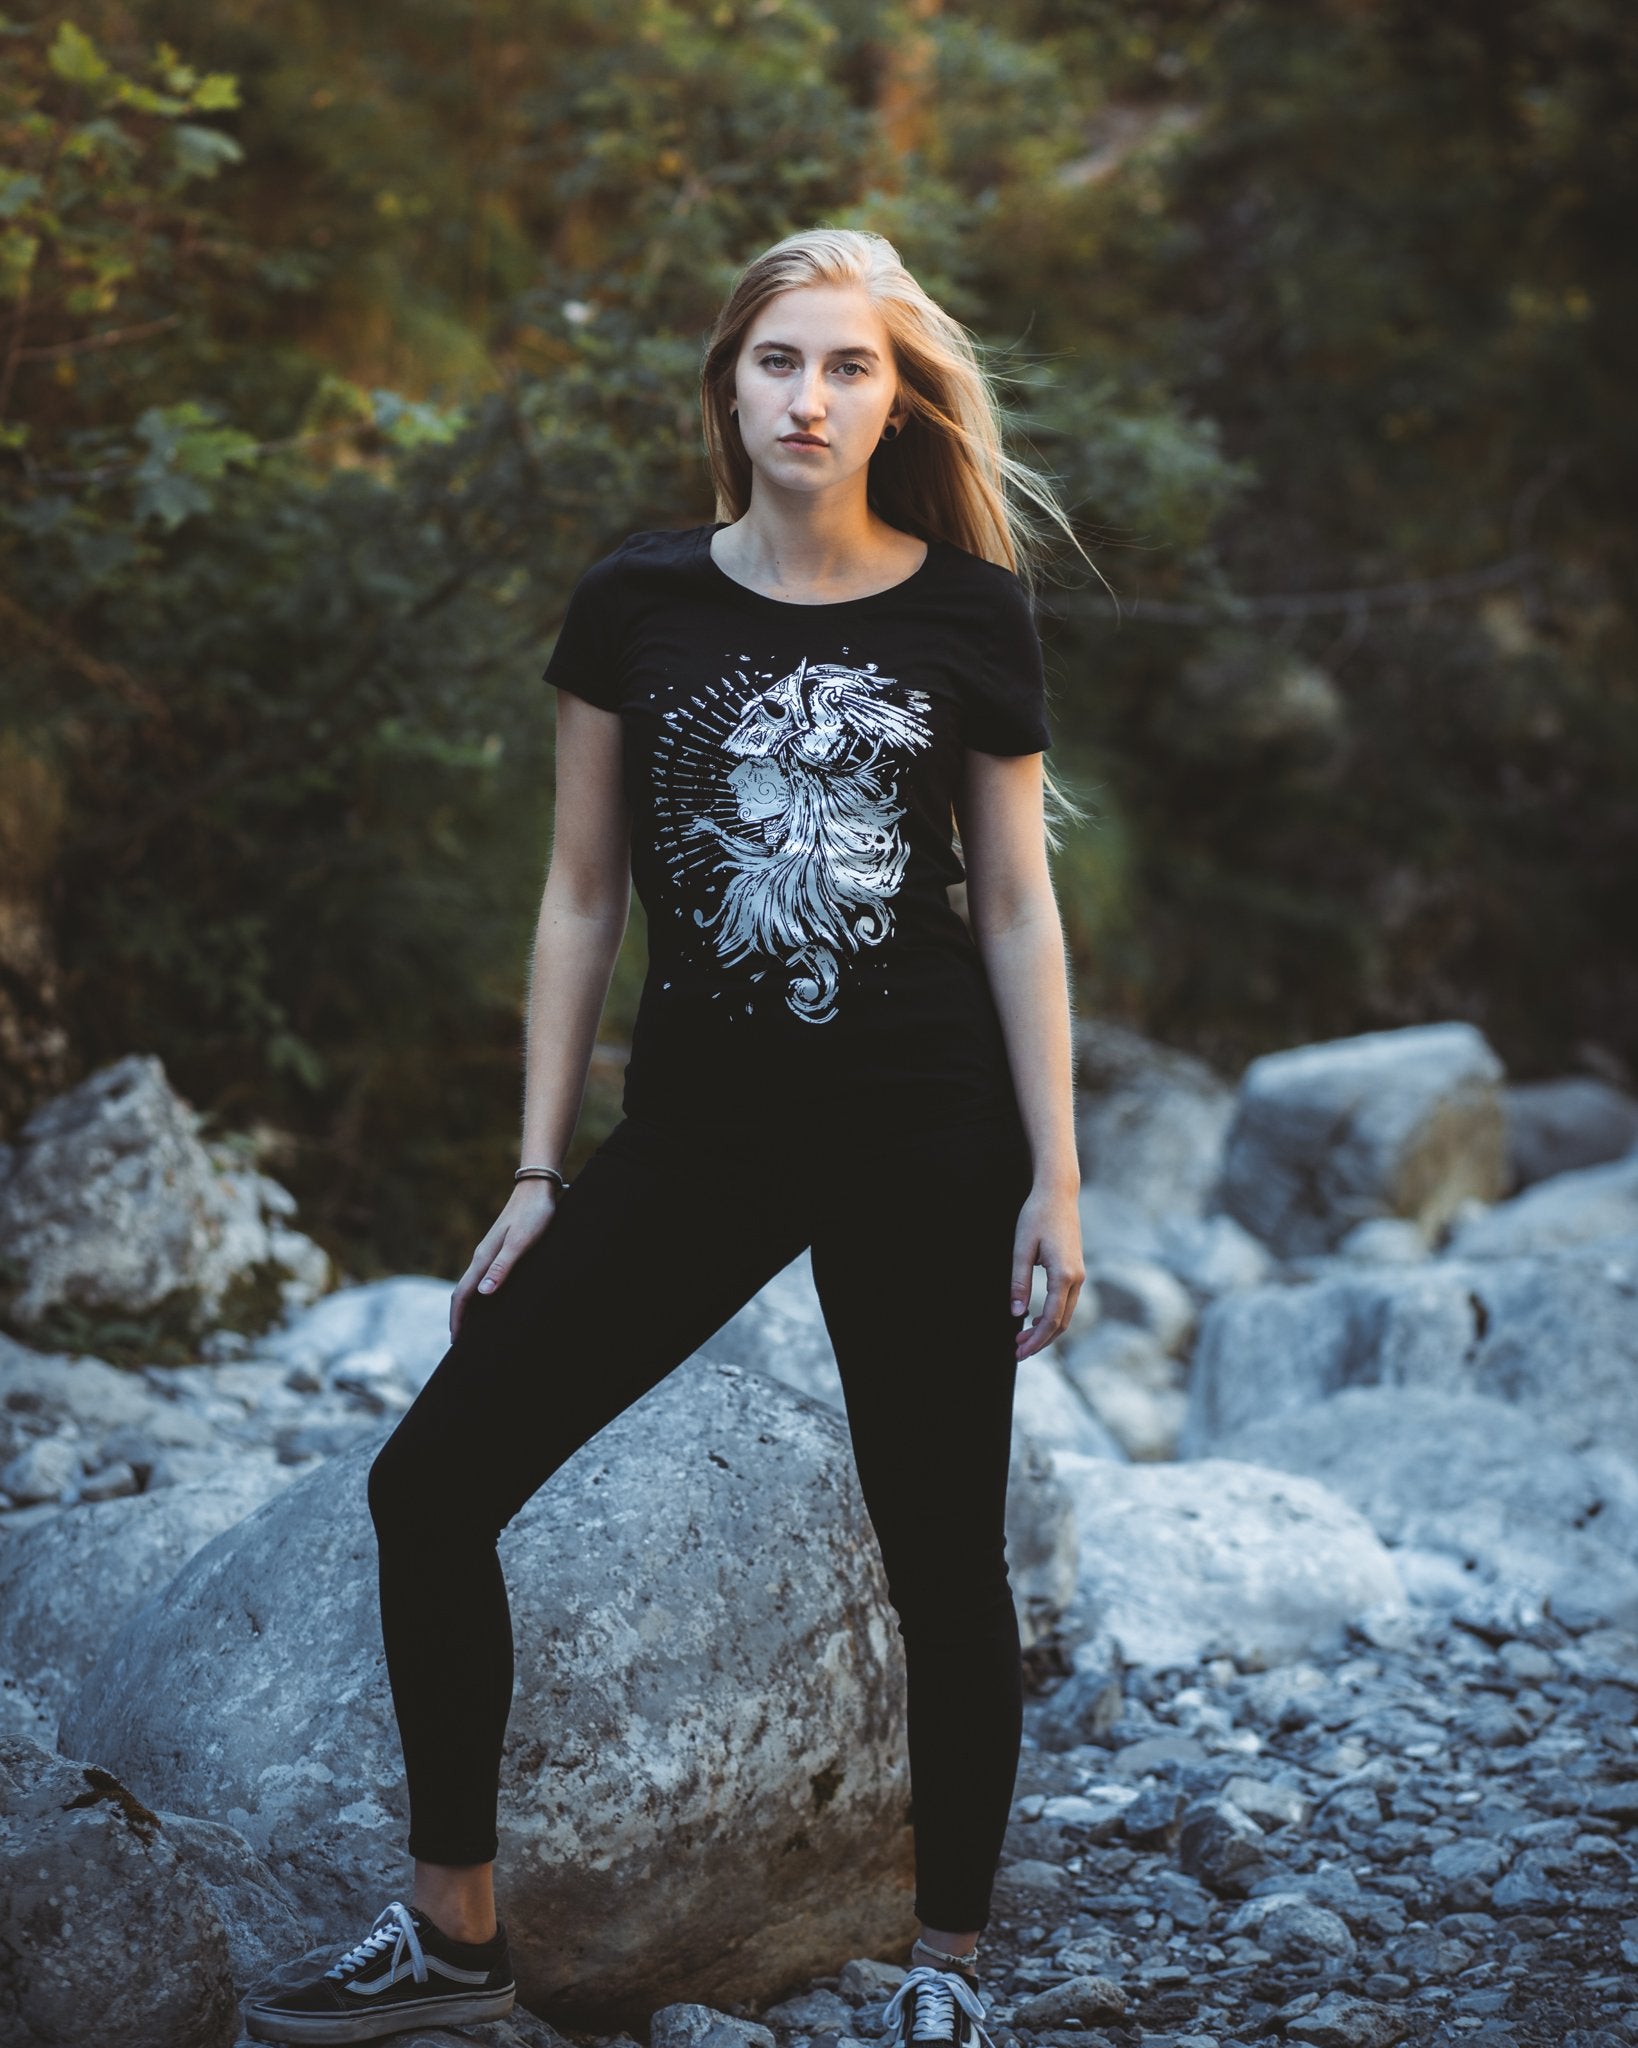 Valkyrie, Descended from Odin, Wanderers Warriors,Organic T-shirts, Staithes Hoodie, Merino Wool Hoodie, Odin, TYR, Thor, Ragnar, Bjorn Ironside, Vikings, Anglo Saxon, Norse, Fitness Gear, Horns, Jewellery, Silver